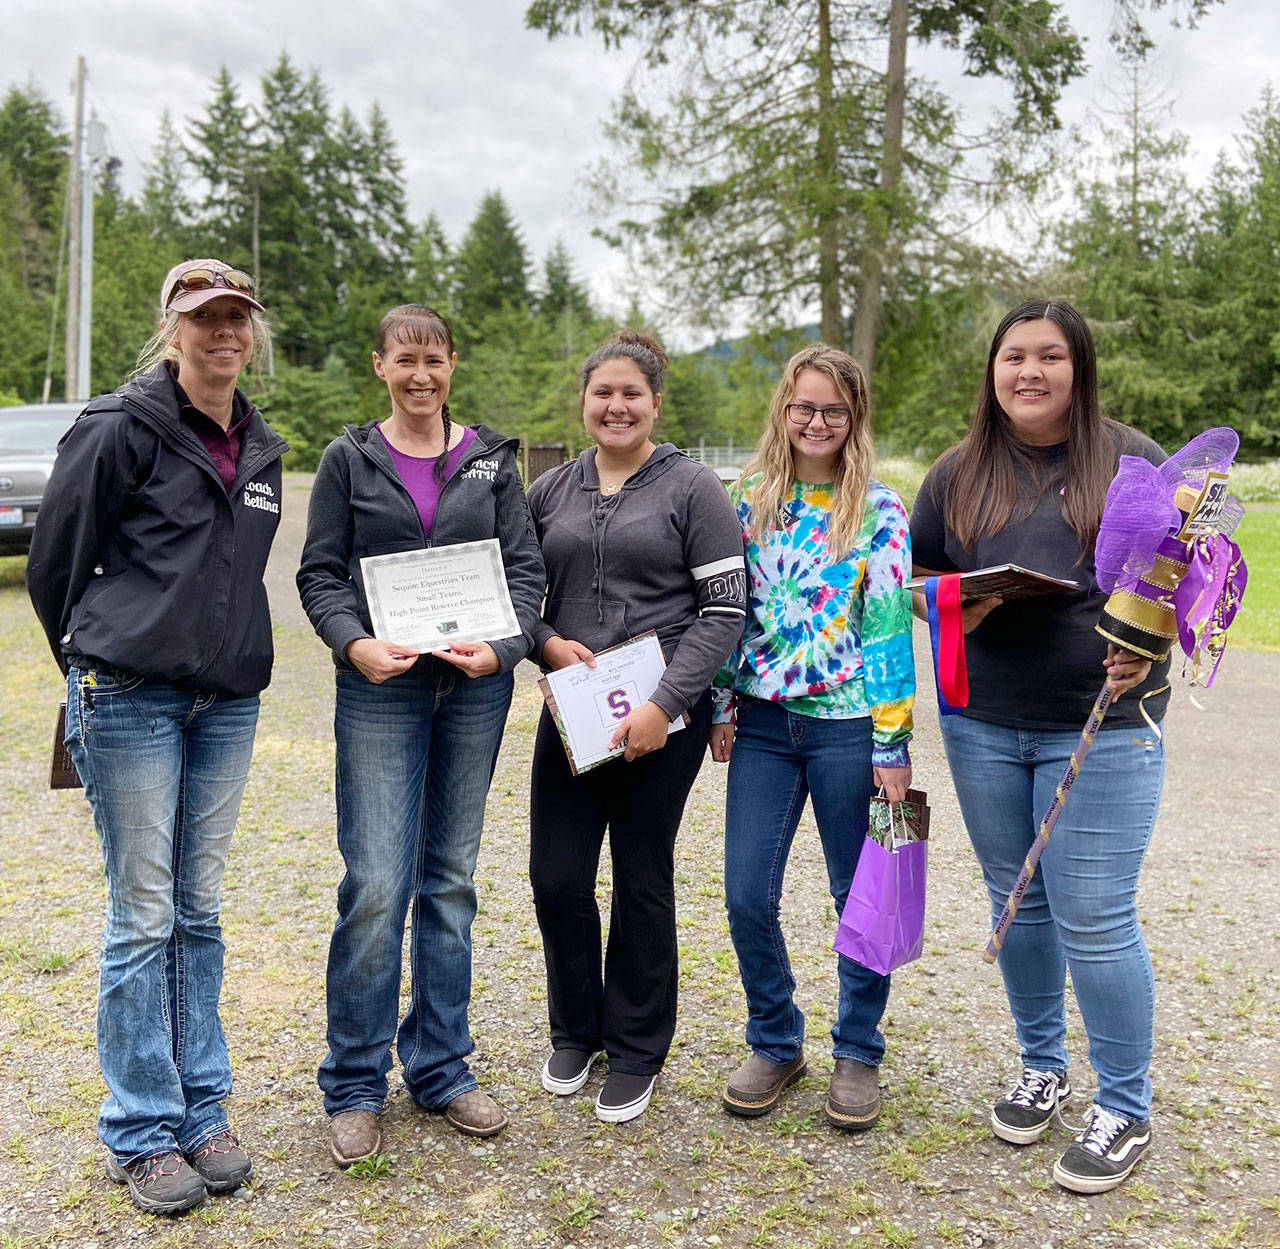 The Sequim Equestrian Team is looking to build its roster for the 2020-2021 season. Pictured, from left, are coaches Bettina Hoesel and Katie Newton, team members Abby Garcia, Keri Tucker and team captain Lilly Thomas. Submitted photo